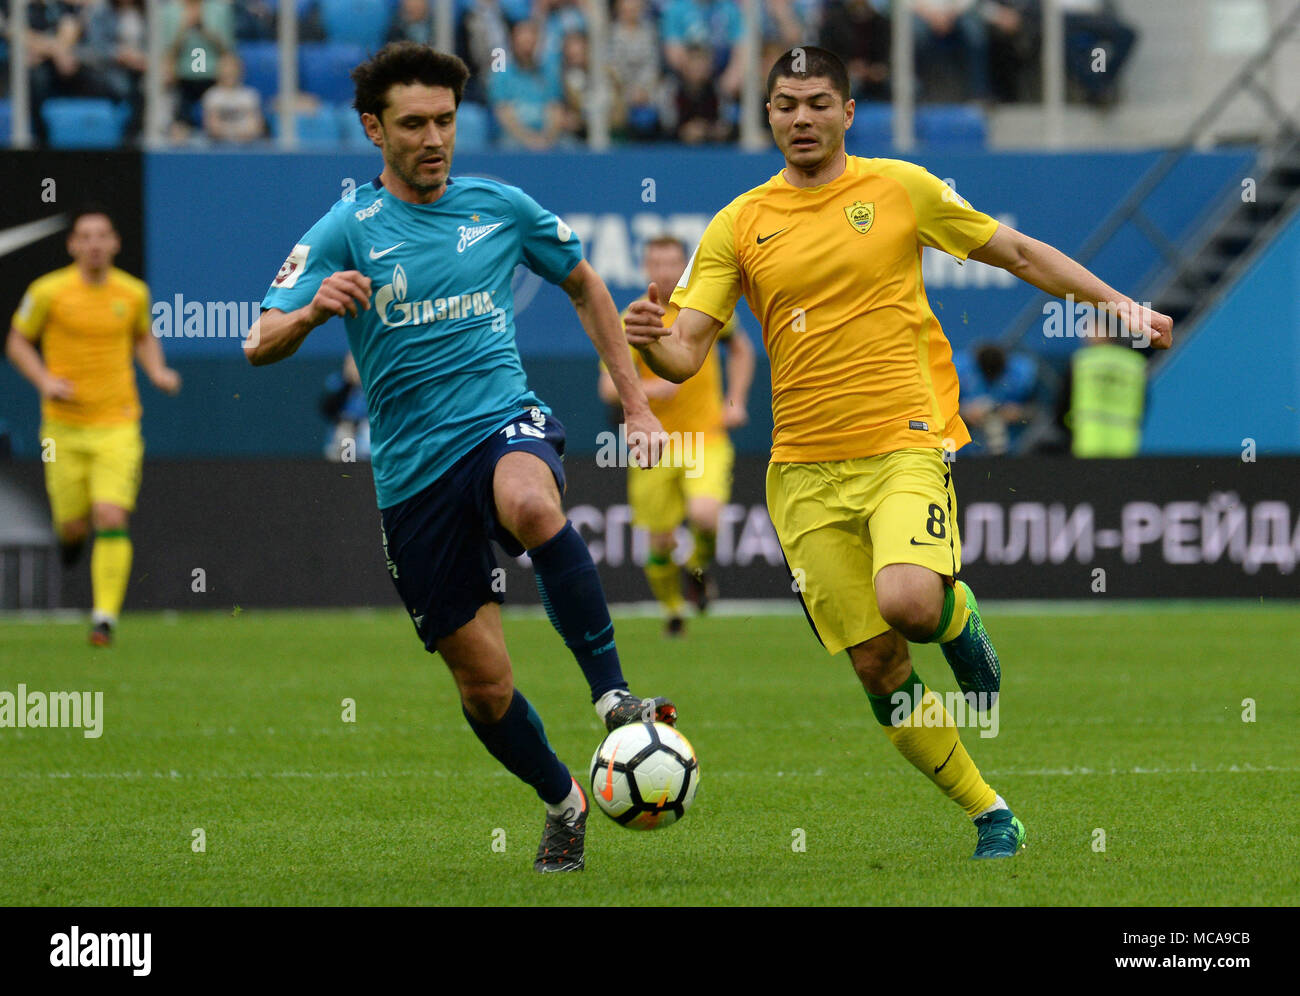 St. Petersburg, Russia. 14th Apr, 2018. Russia. St. Petersburg. April 14, 2018. Players of ZENIT Yuri Zhirkov and ANZHI Arsen Hubulov (from left to right) in a match of the Russian Football Championship between the ZENIT team (St. Petersburg) and team of ANZHI Credit: Andrey Pronin/ZUMA Wire/Alamy Live News Stock Photo